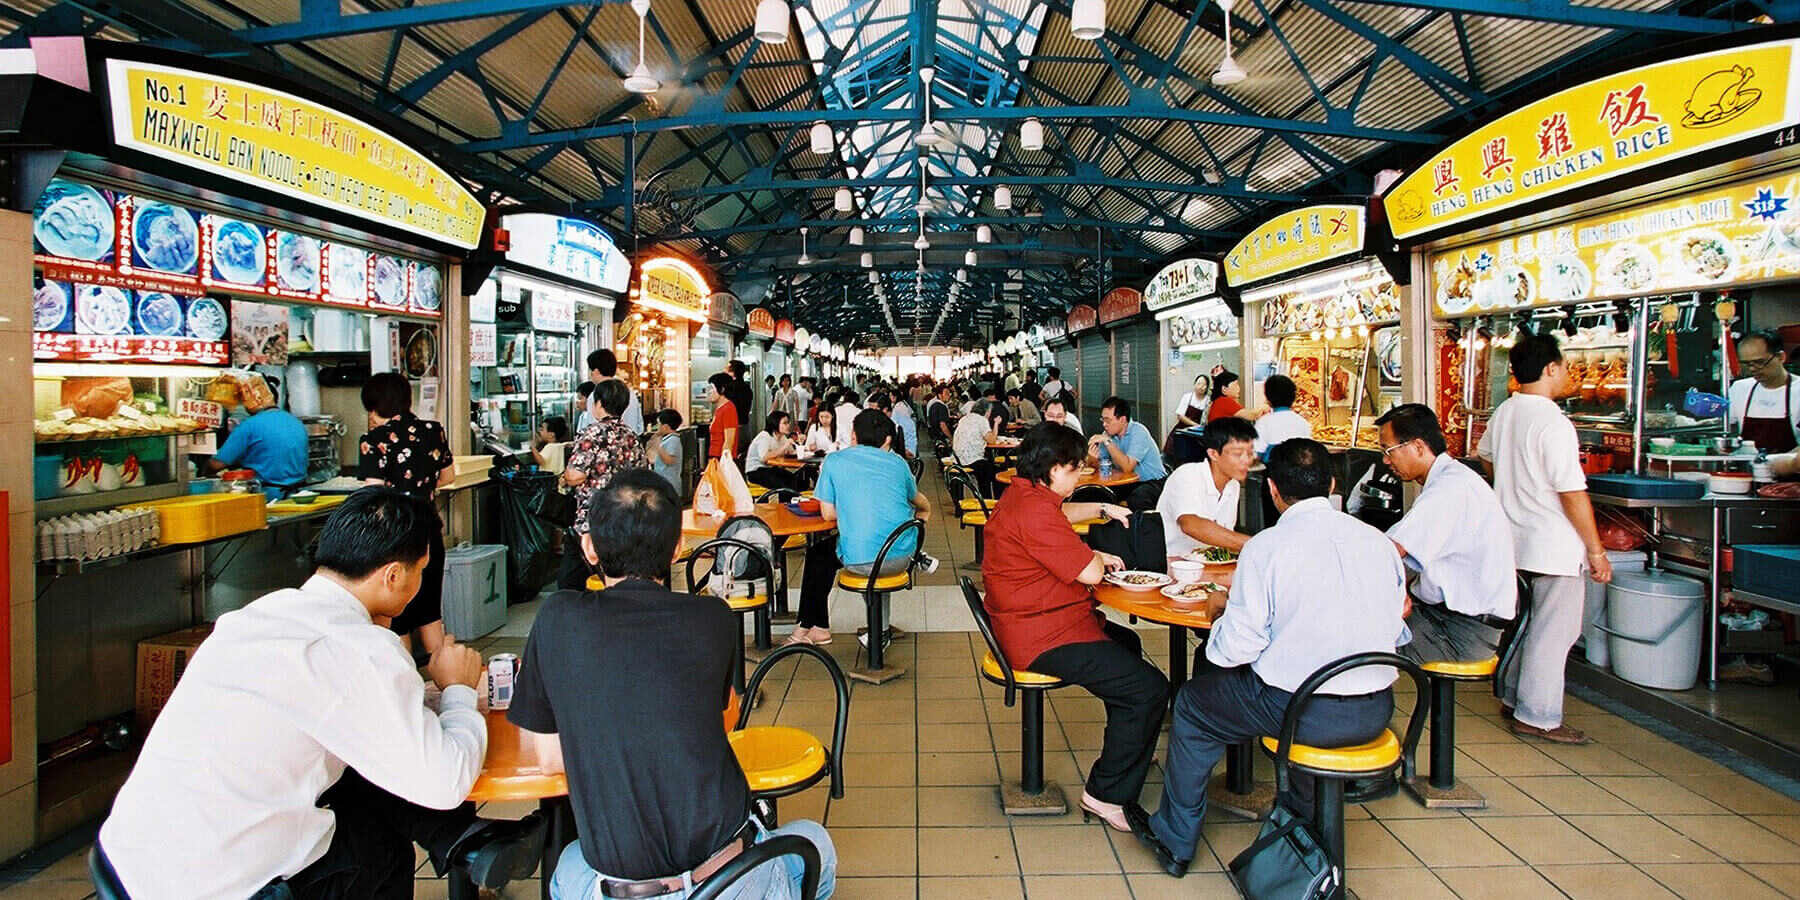 14-astonishing-facts-about-maxwell-road-hawker-centre-singapore